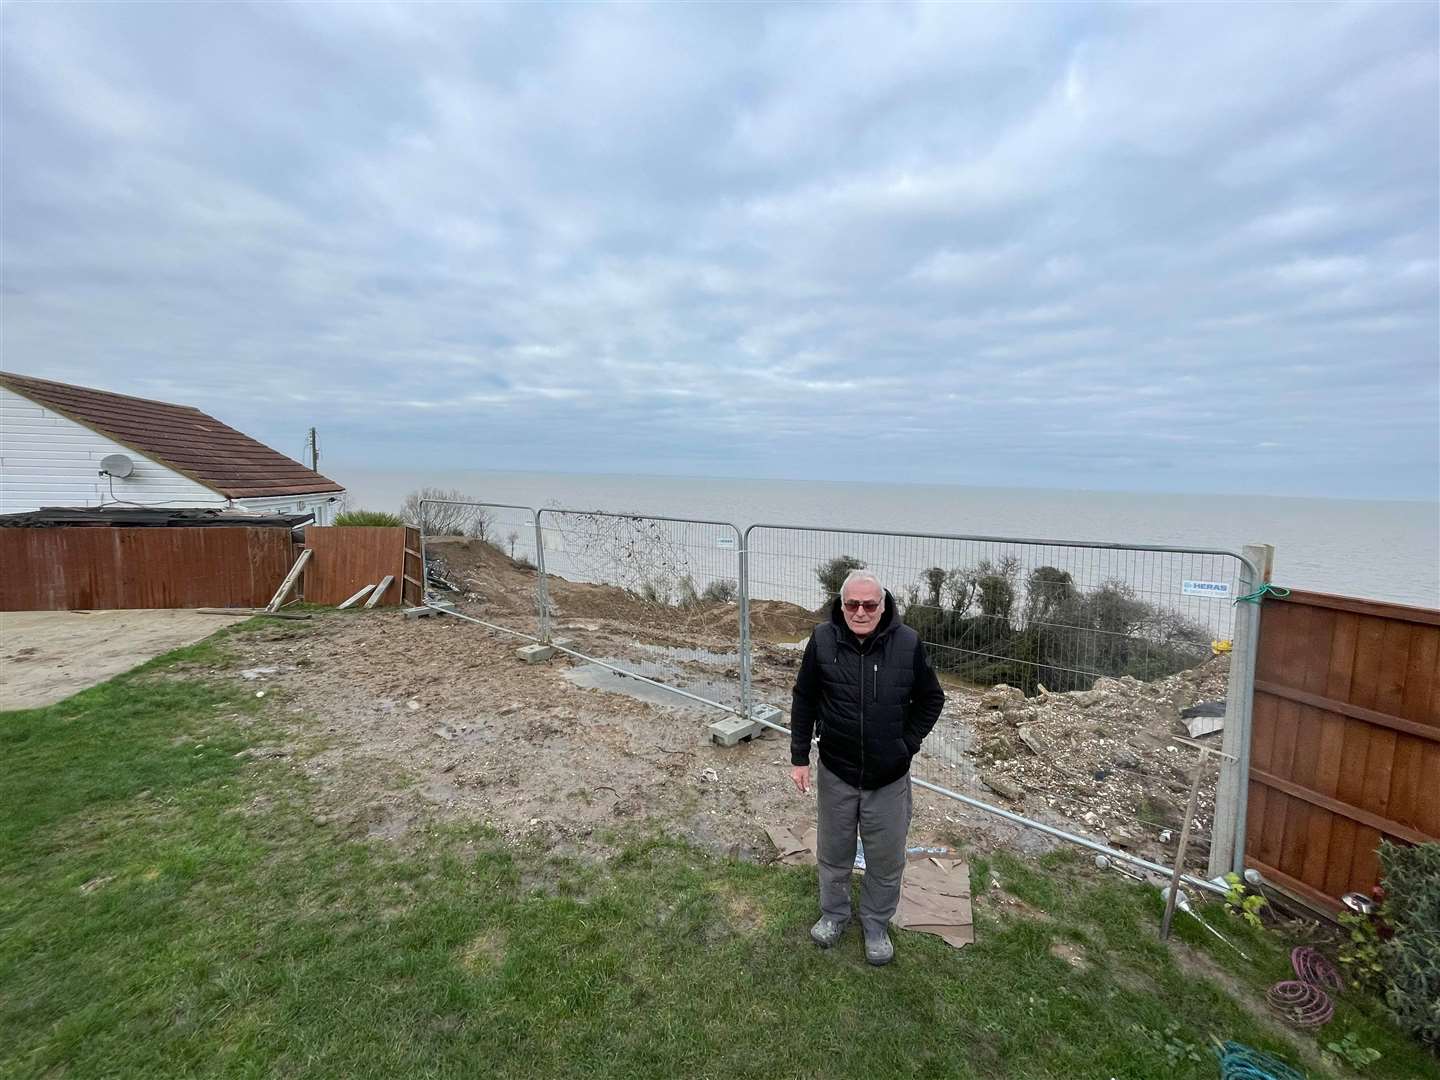 Ed standing in his back garden, of which he has lost at least 18ft since the cliff collapse in 2020